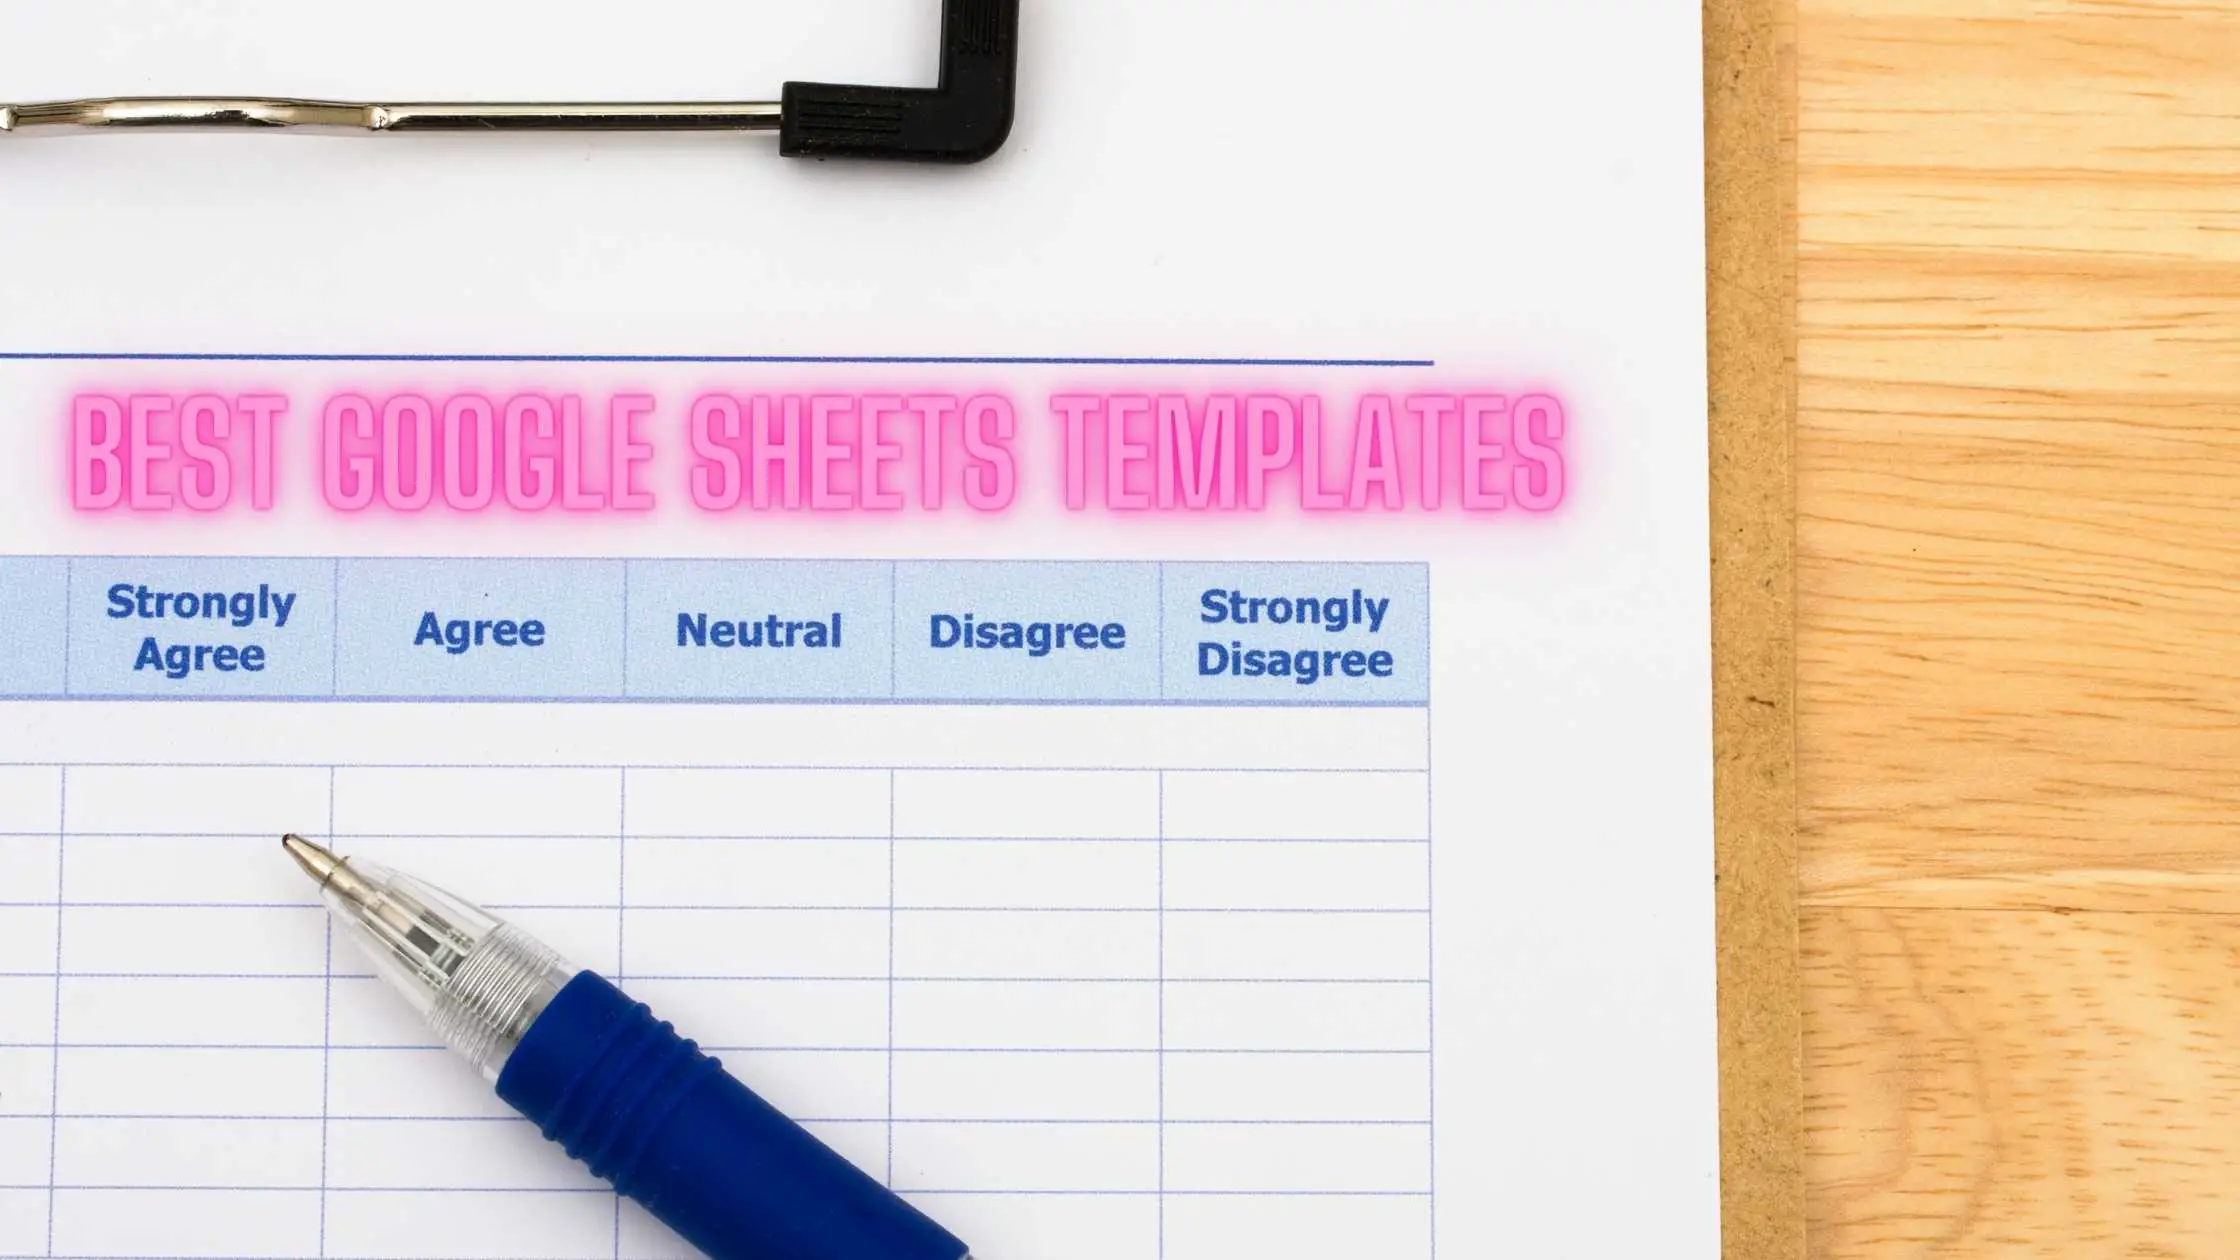 15-of-the-best-google-sheets-templates-in-2020-reviewed